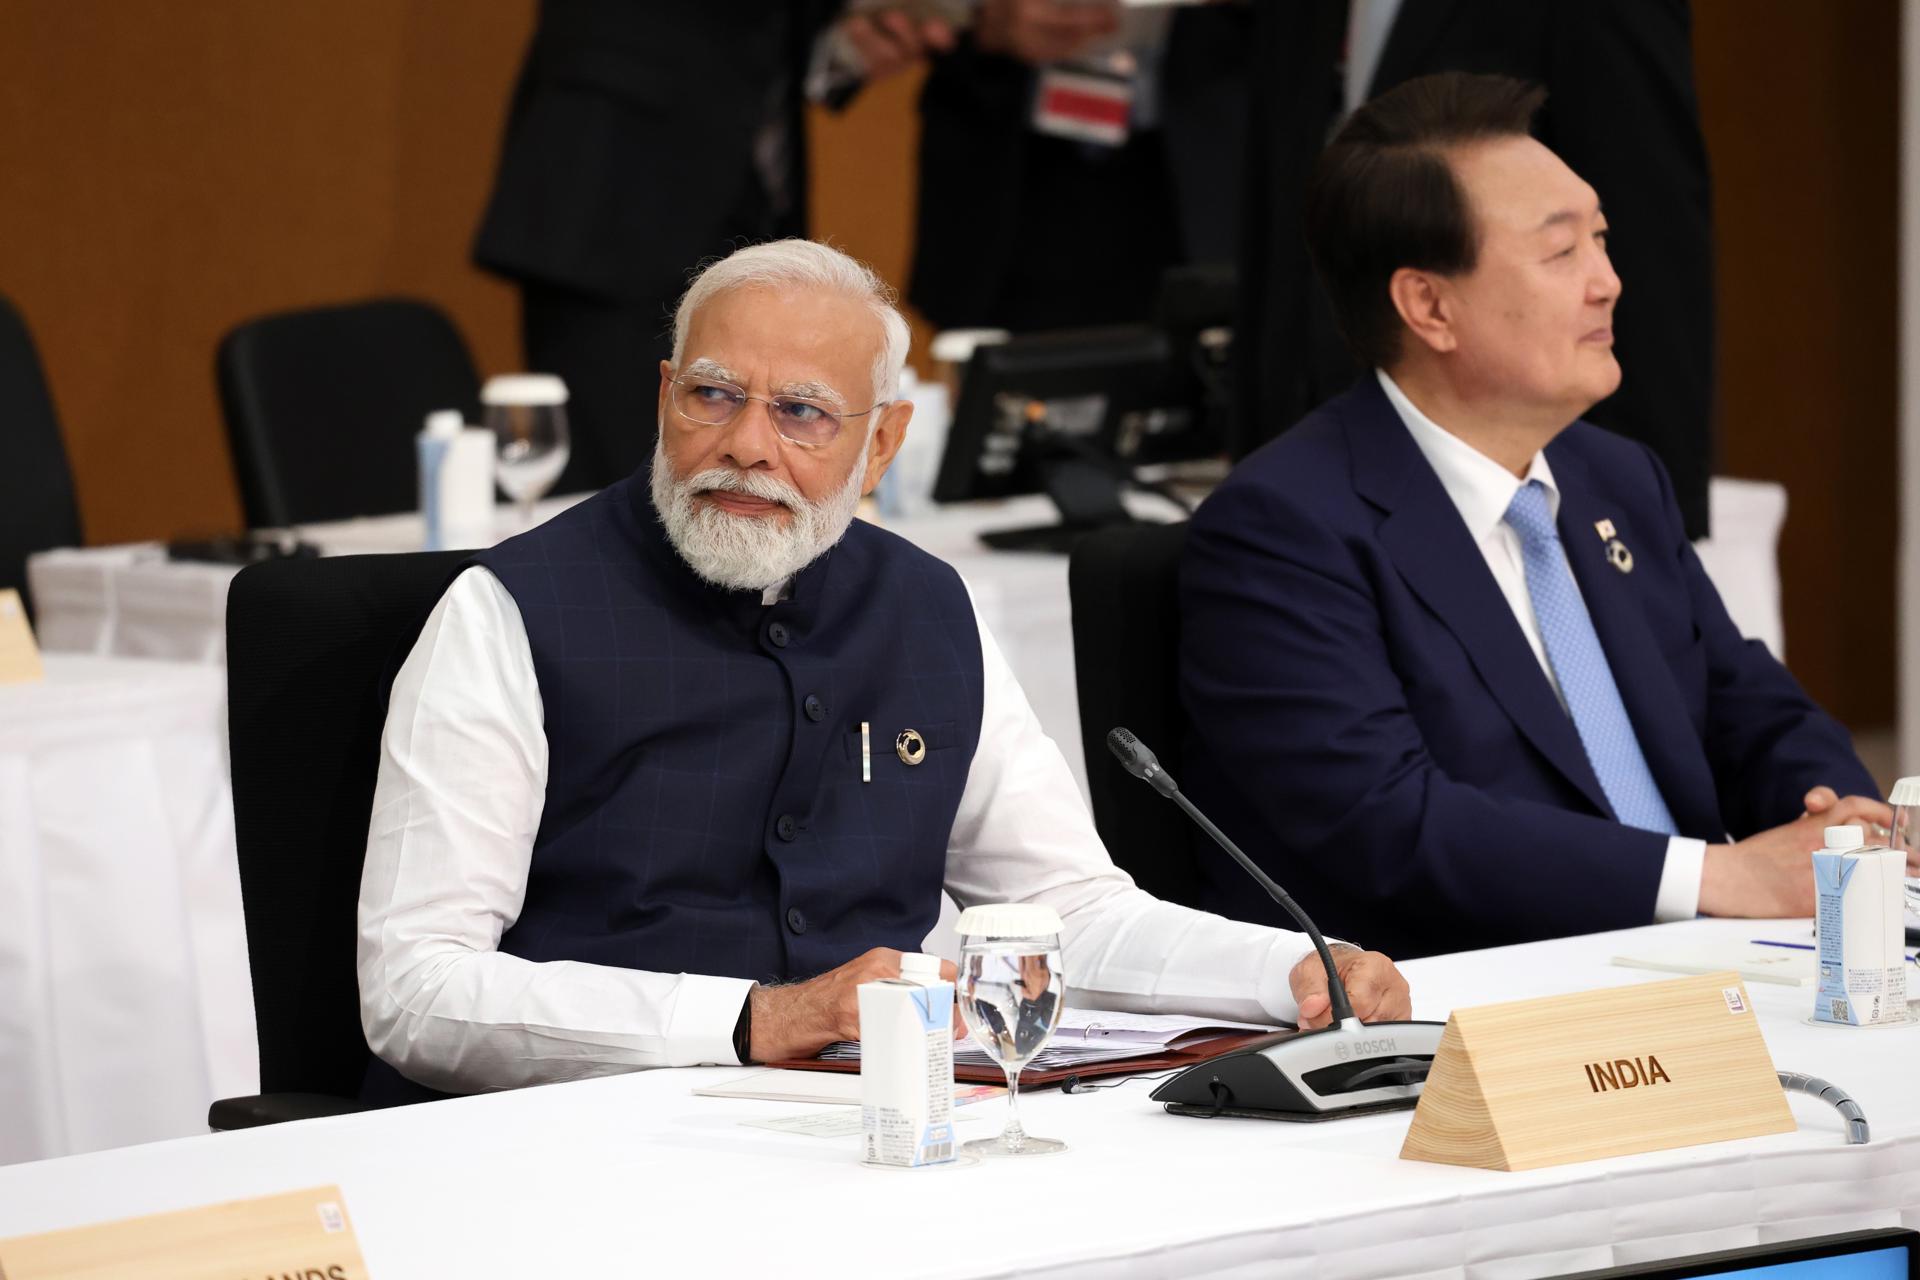 A handout photo made available by the G7 Hiroshima Summit Host shows Indian Prime Minister Narendra Modi (L) at the Grand Prince Hotel Hiroshima during the G7 Hiroshima Summit in Hiroshima, Japan, 20 May 2023. EFE-EPA FILE/G7 Hiroshima Summit Host / HANDOUT HANDOUT EDITORIAL USE ONLY/NO SALES